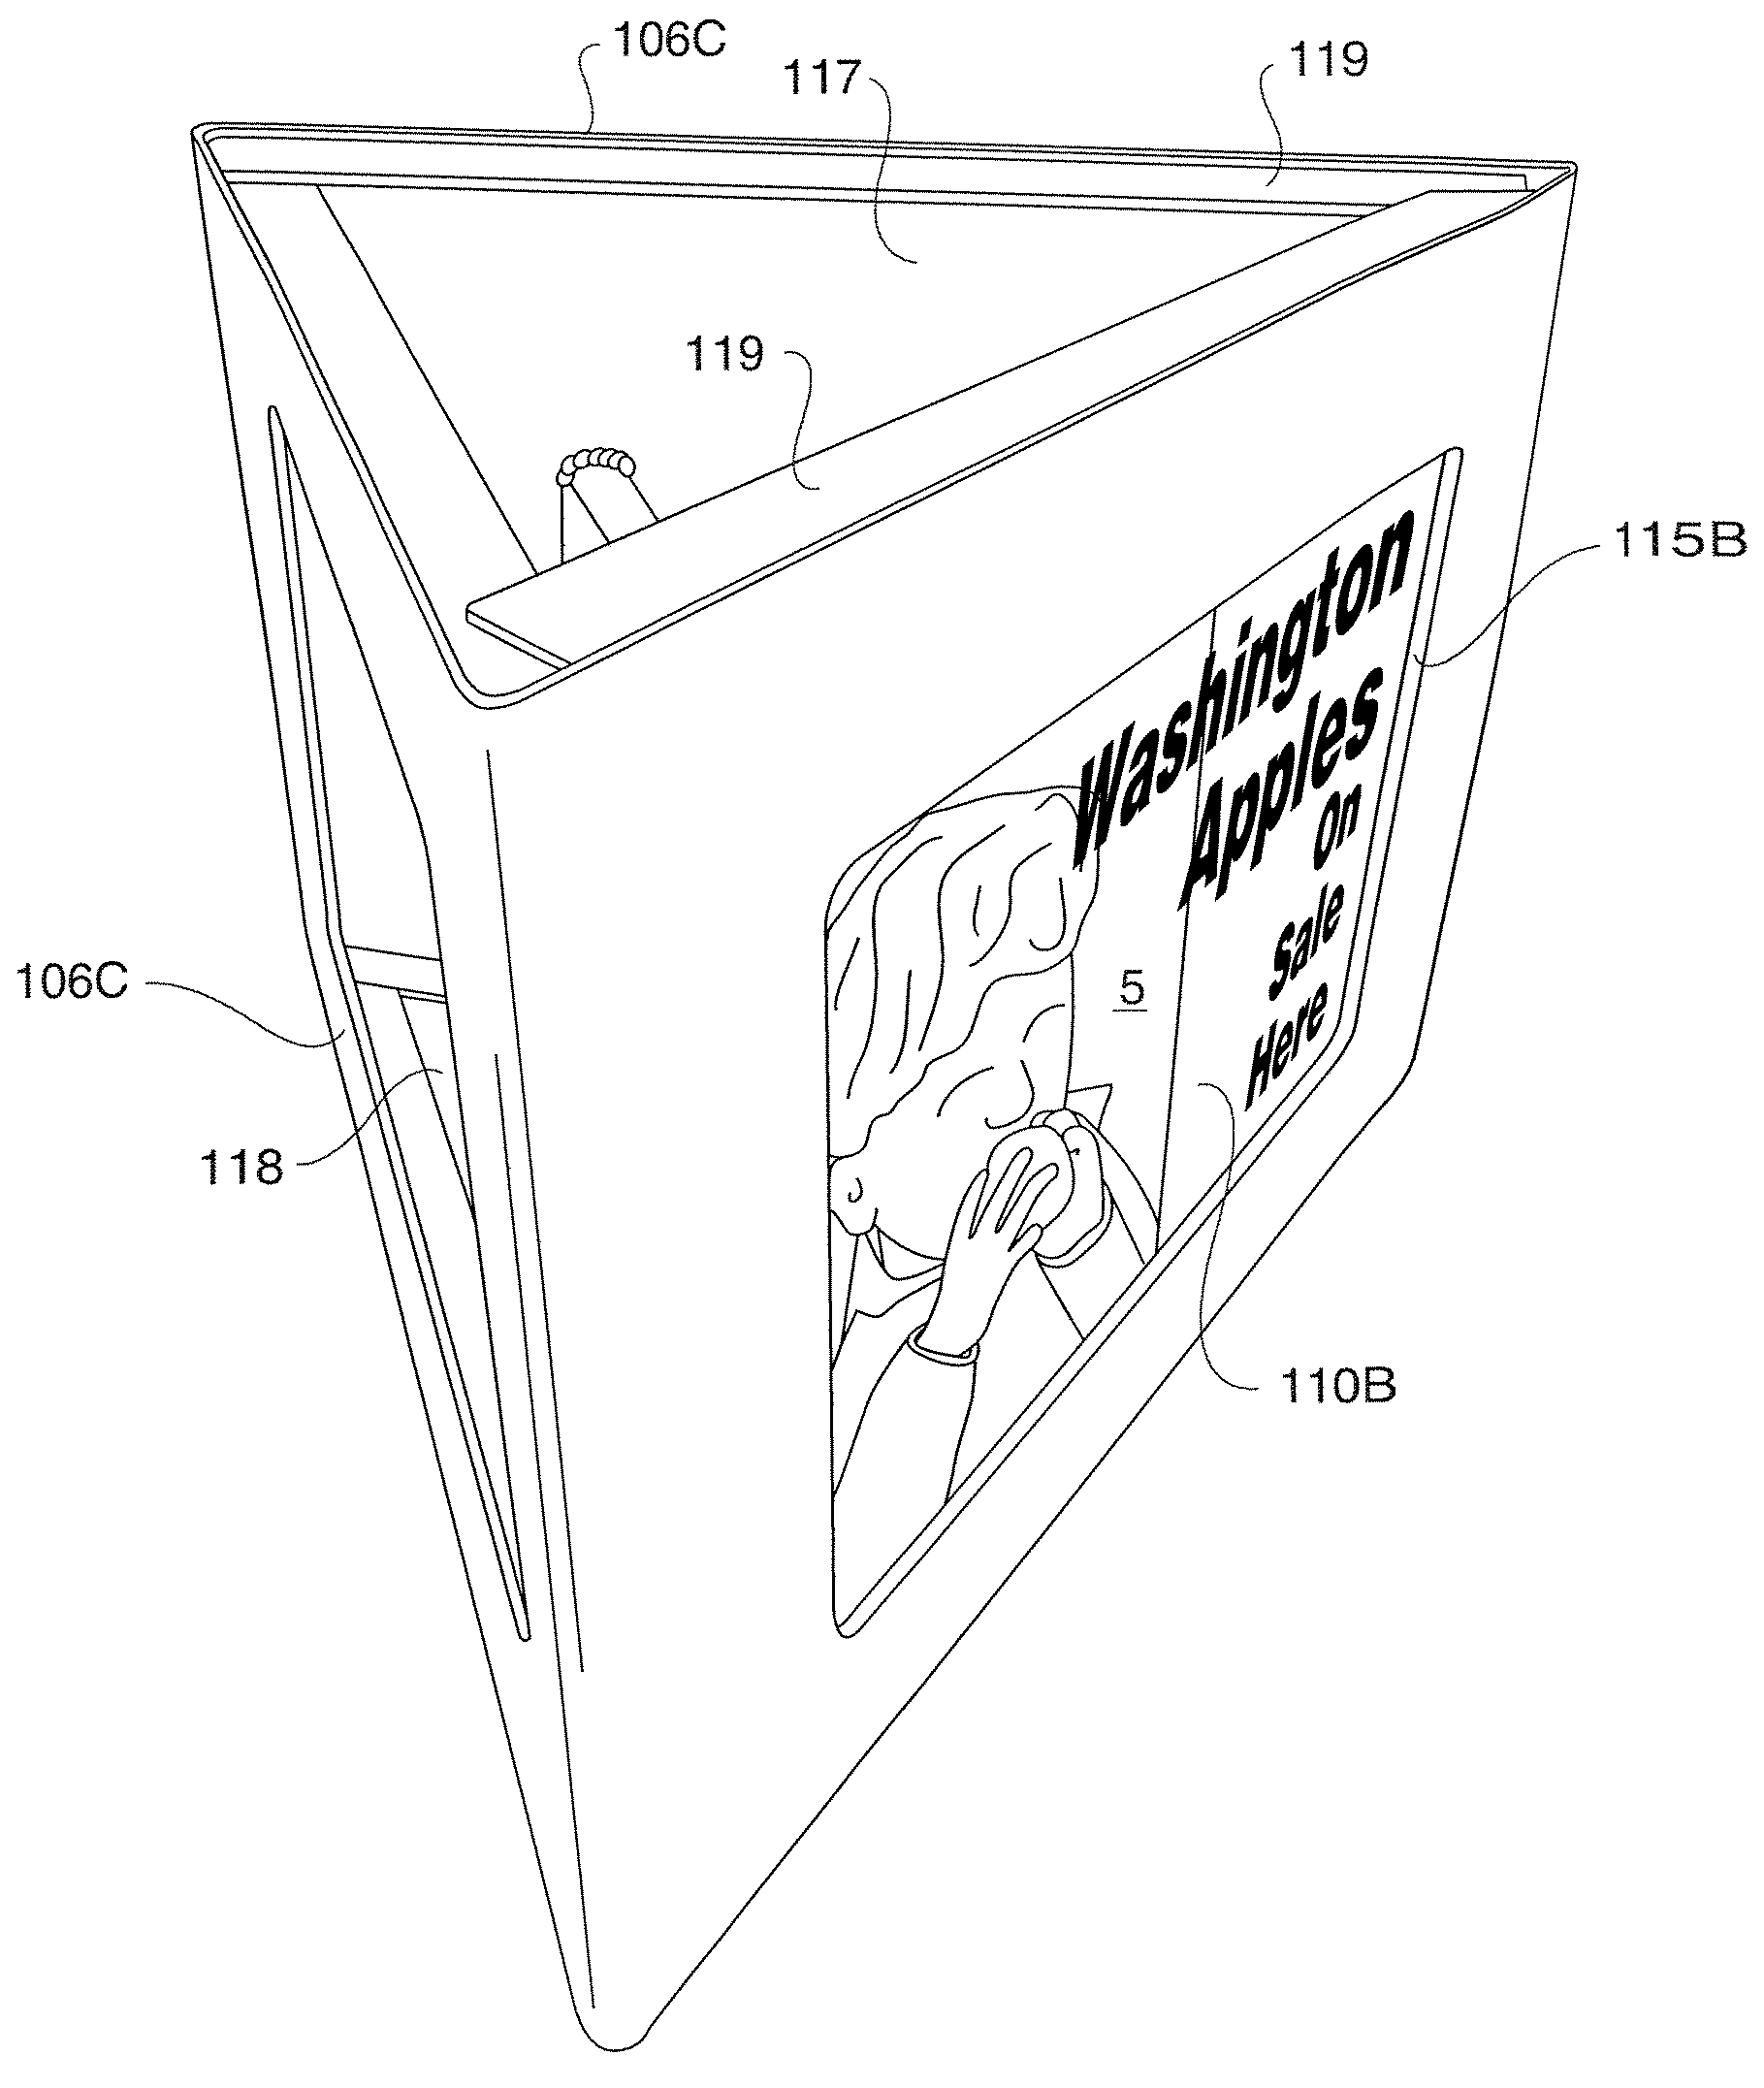 Method of providing an electronic advertising service with leasing of electronic advertising displays